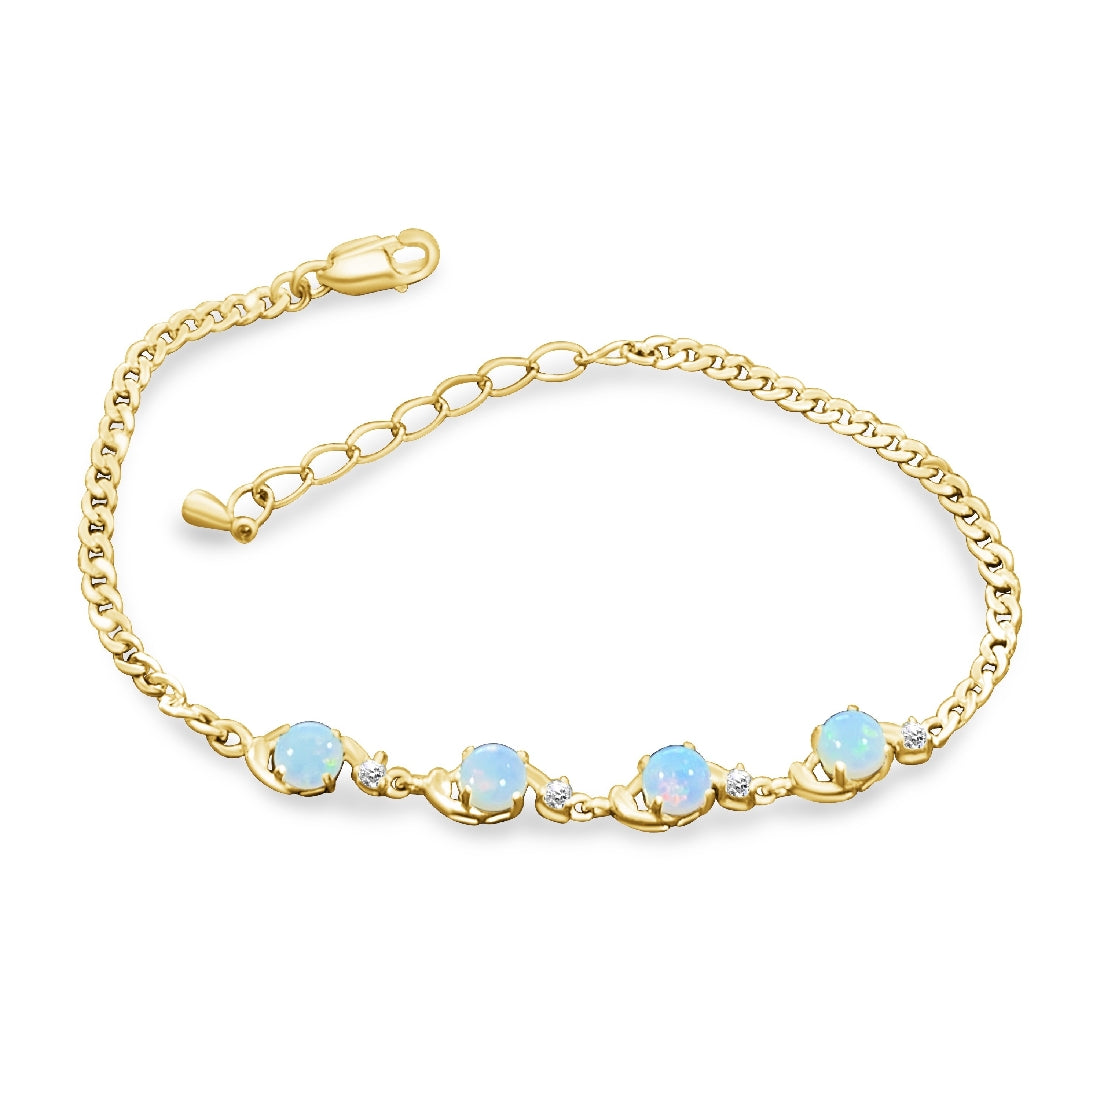 Gold Plated Silver 5mm White Opal round and crystal bracelet - Masterpiece Jewellery Opal & Gems Sydney Australia | Online Shop